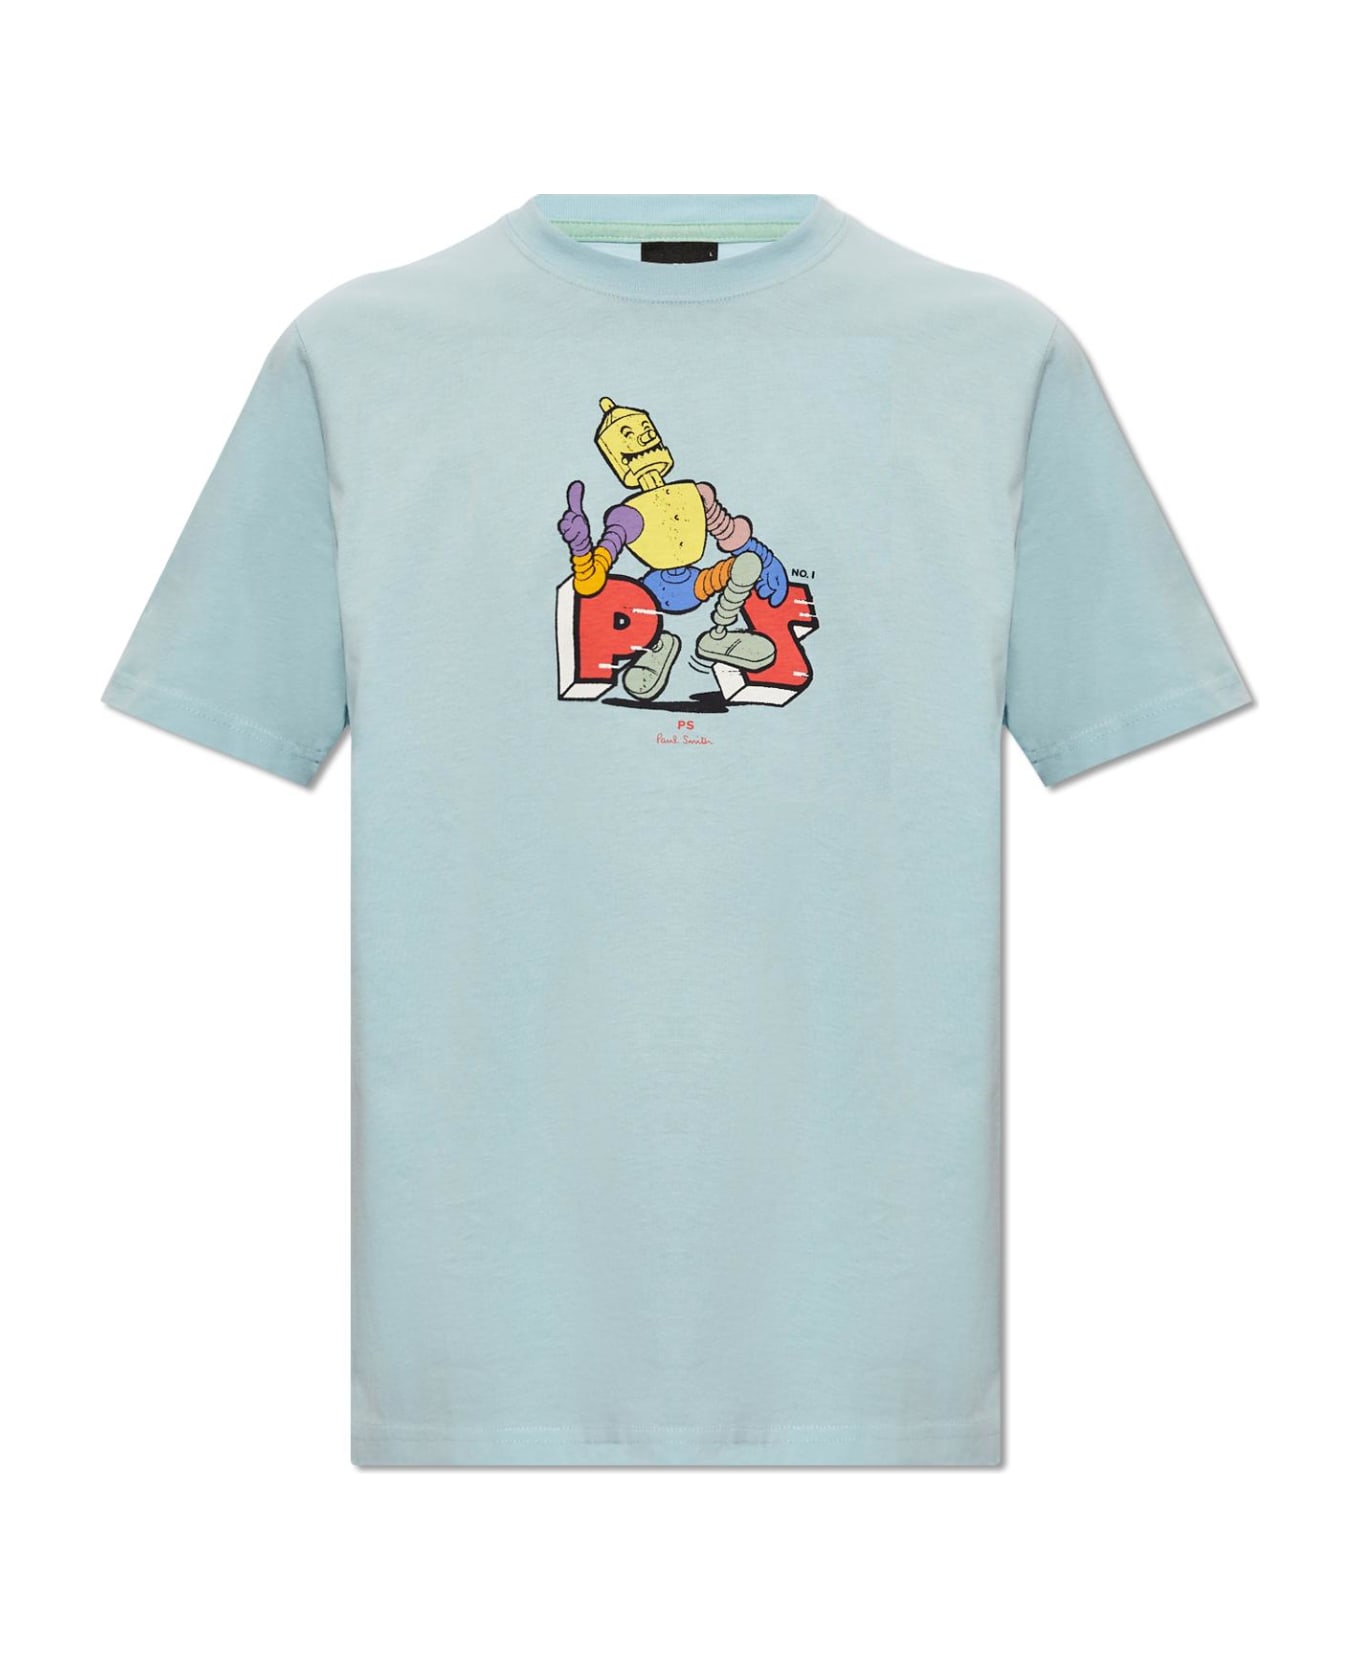 Paul Smith Ps Paul Smith Printed T-shirt - Clear Blue シャツ